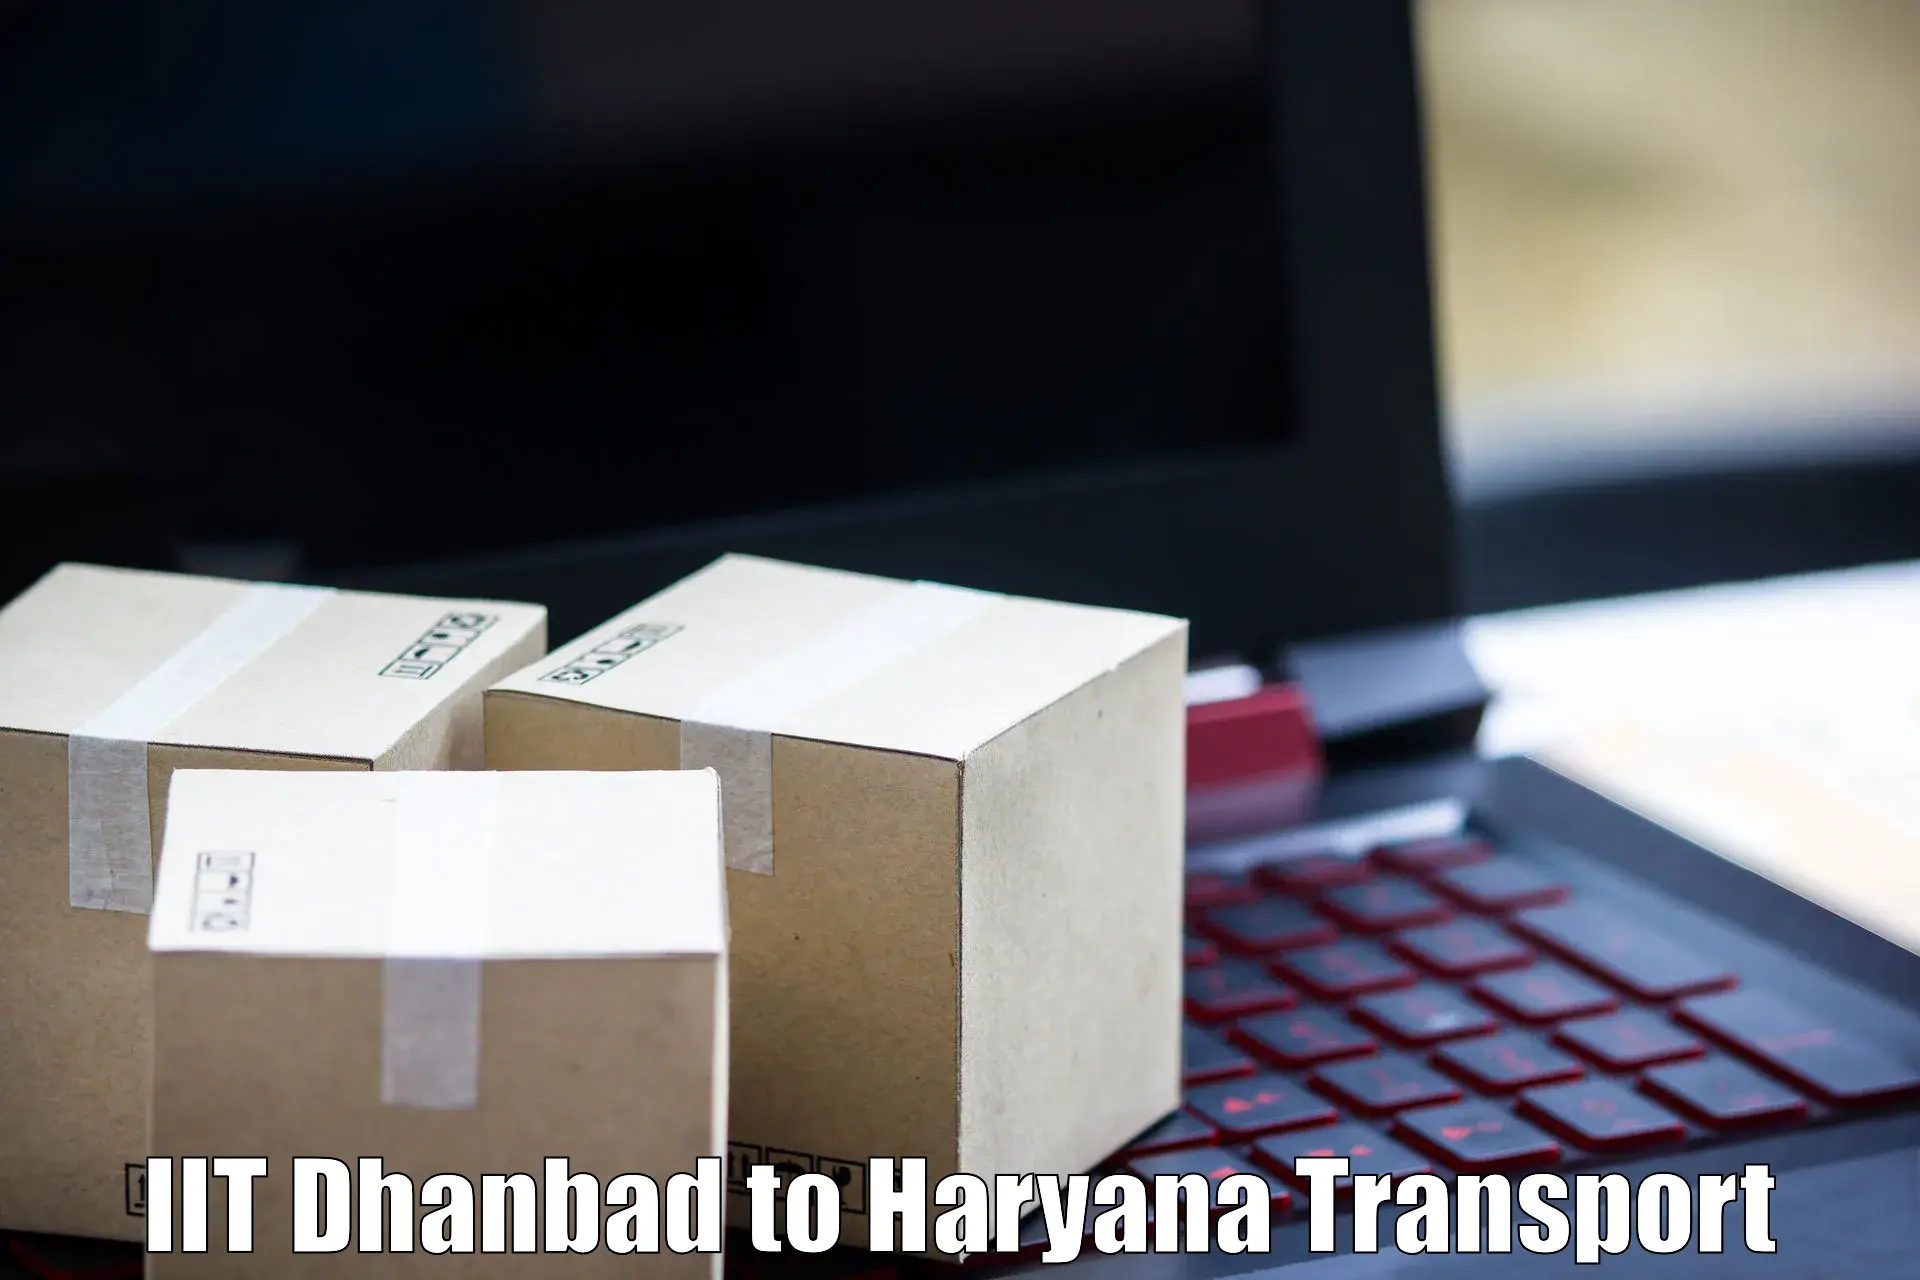 Nationwide transport services IIT Dhanbad to Sonipat